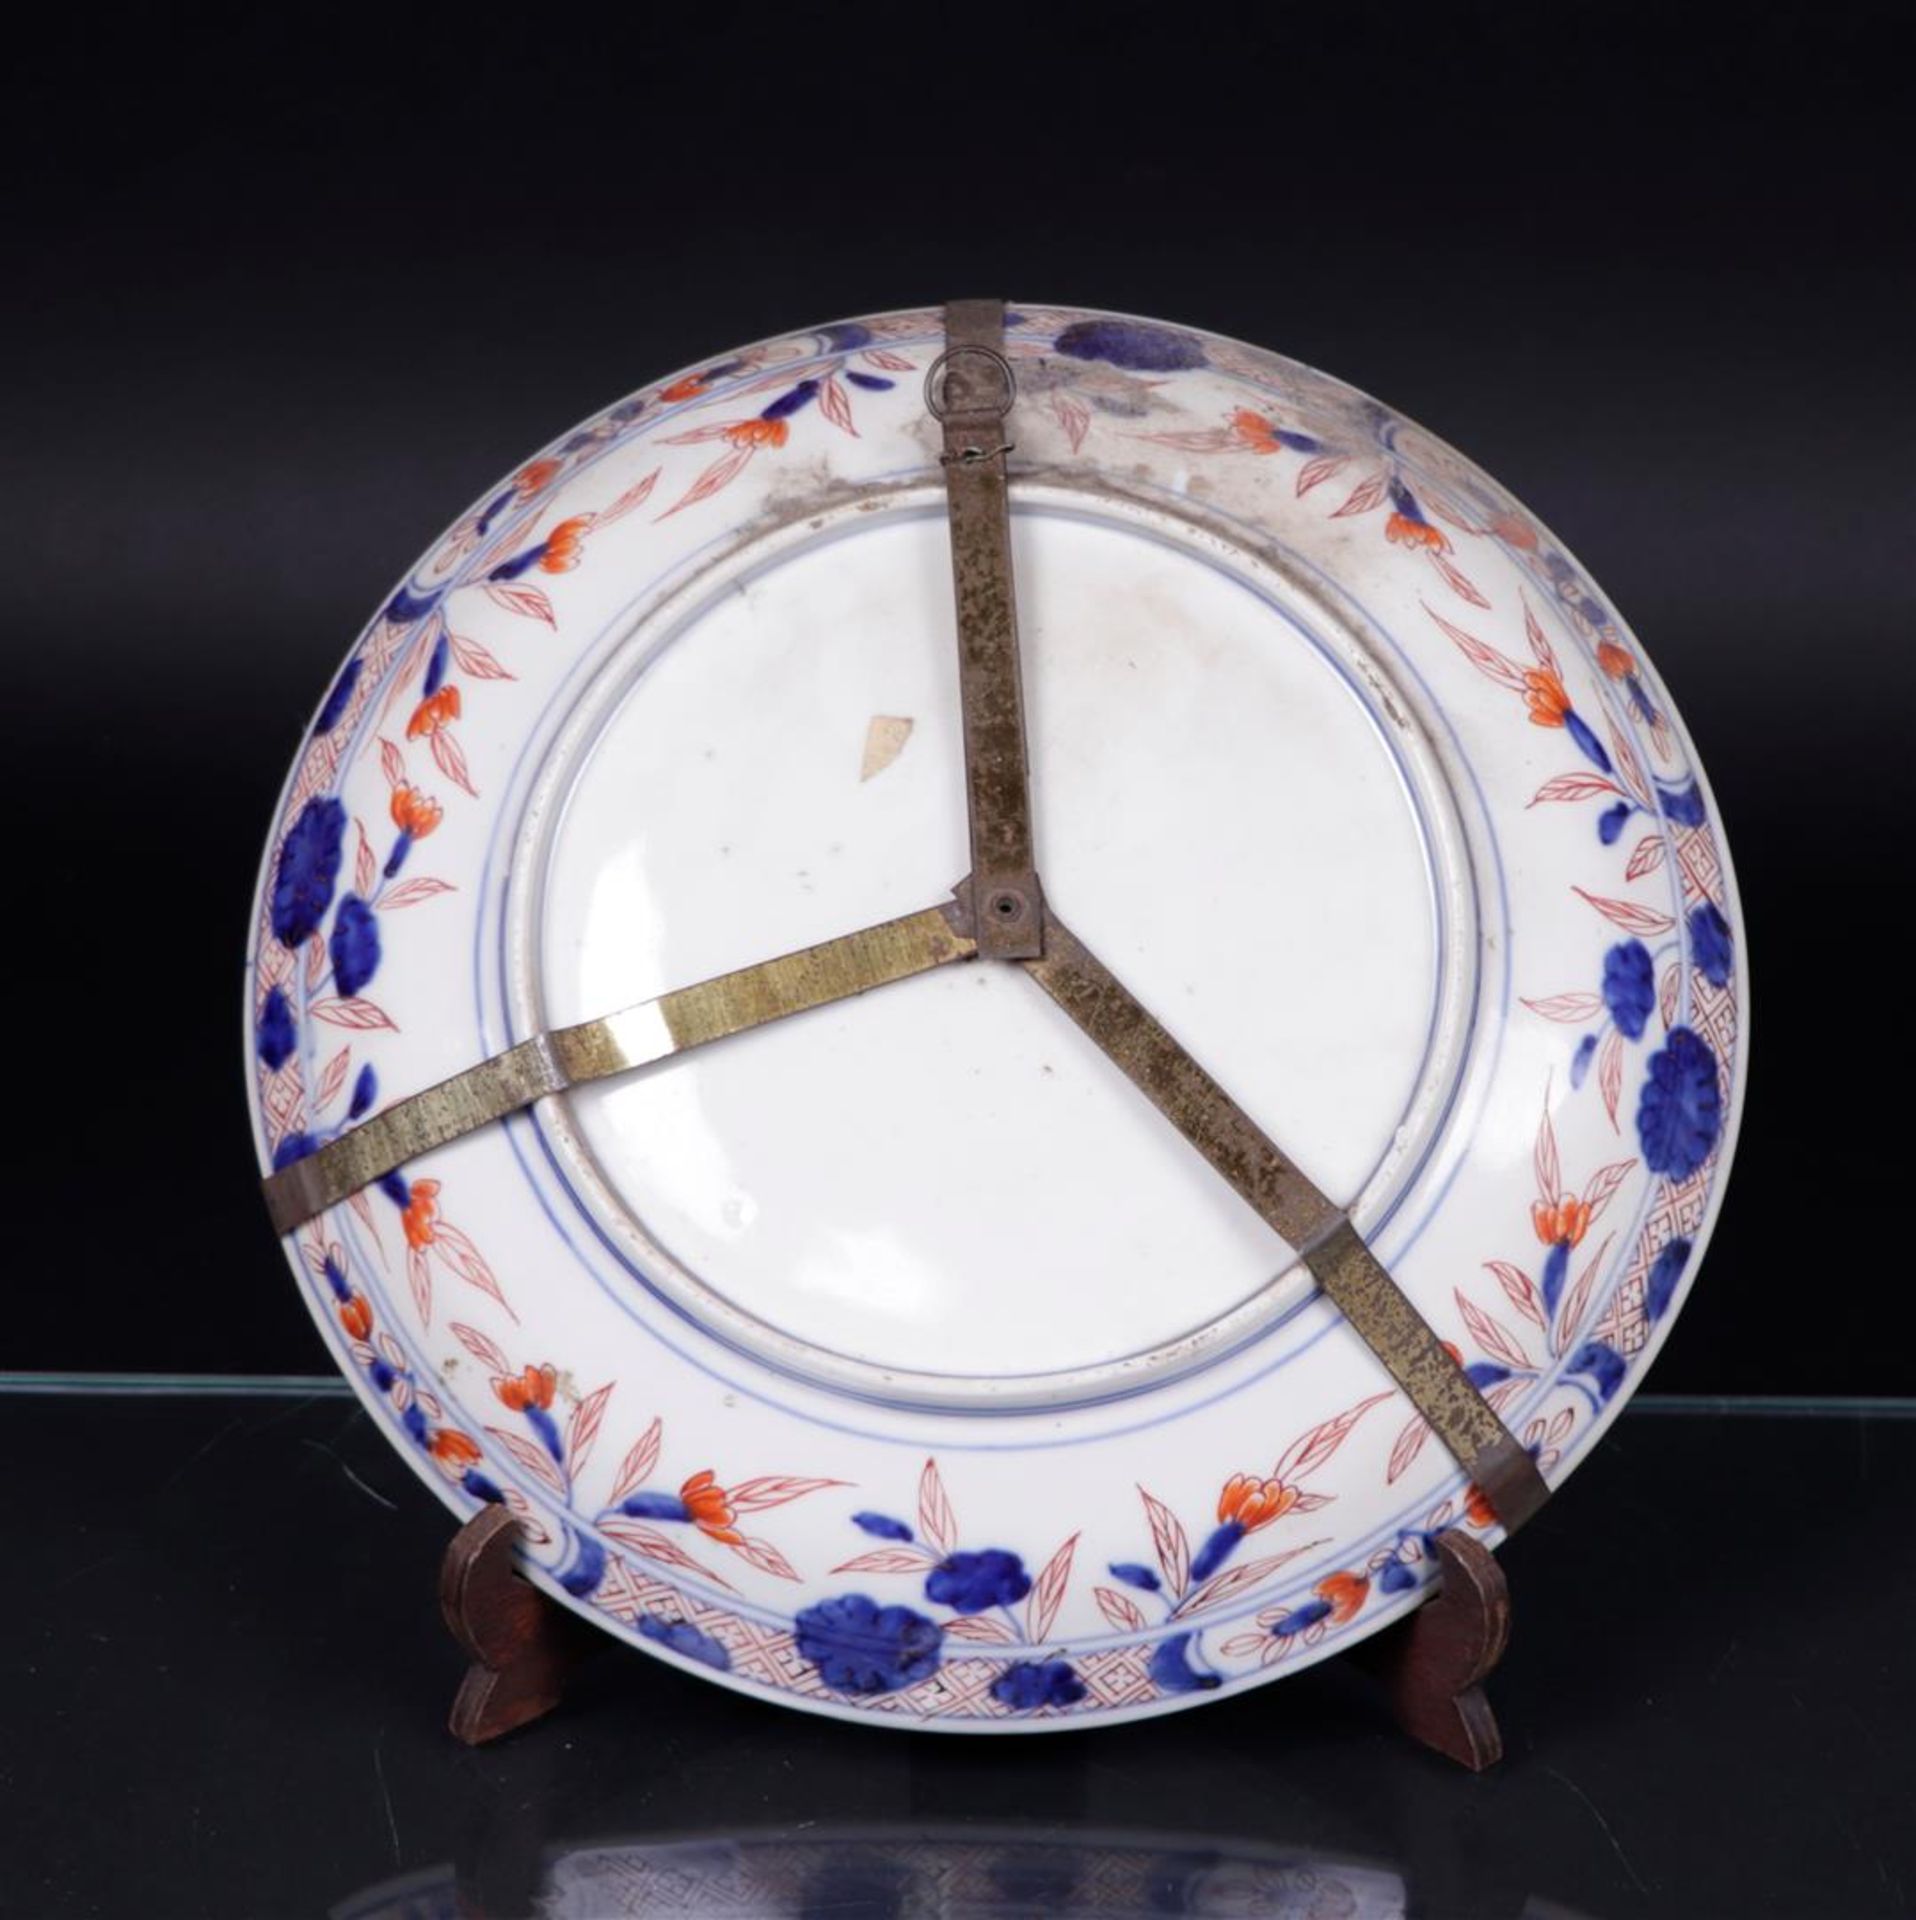 A large porcelain dish with border and flower decoration. Chinese Imari 19th century.
Diam. 31 cm. - Image 2 of 2